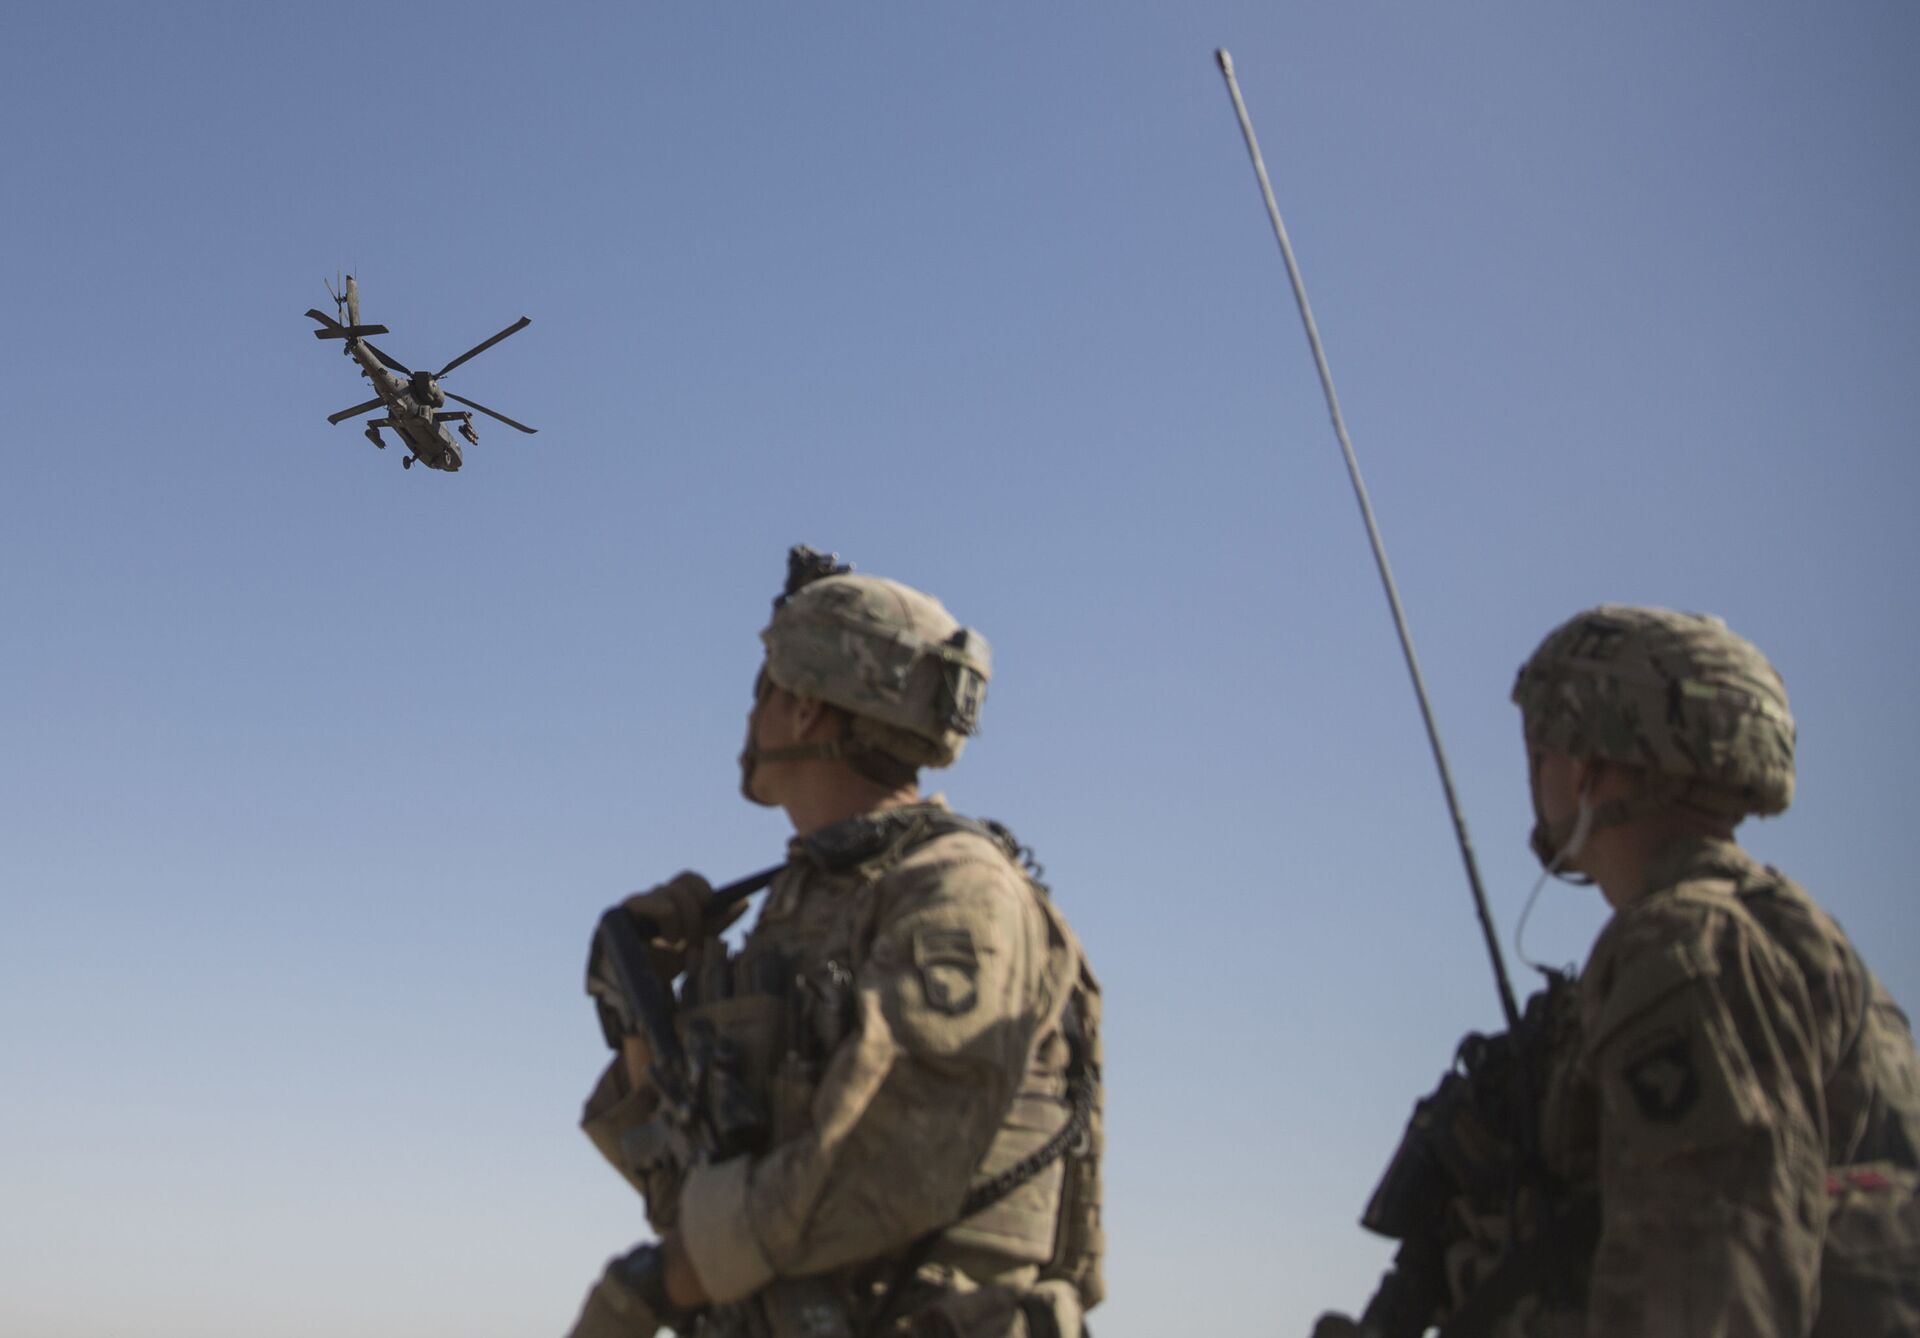 This June 10, 2017 photo released by the U.S. Marine Corps shows an AH-64 Apache attack helicopter provides security from above while CH-47 Chinooks drop off supplies to U.S. Soldiers with Task Force Iron at Bost Airfield, Afghanistan. - Sputnik International, 1920, 07.09.2021